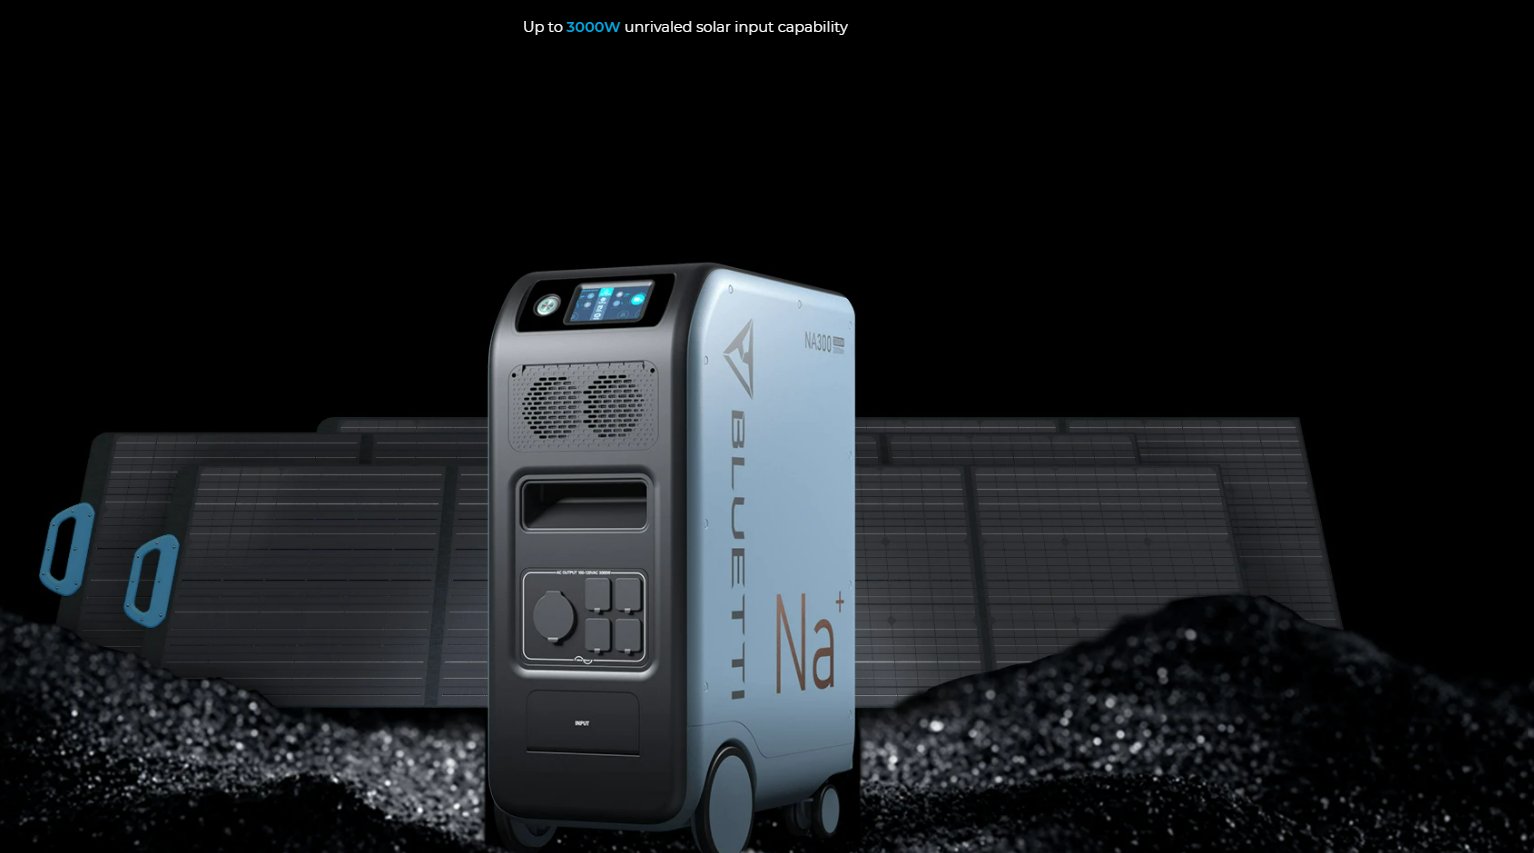 Power your home with these new solar generators from Bluetti